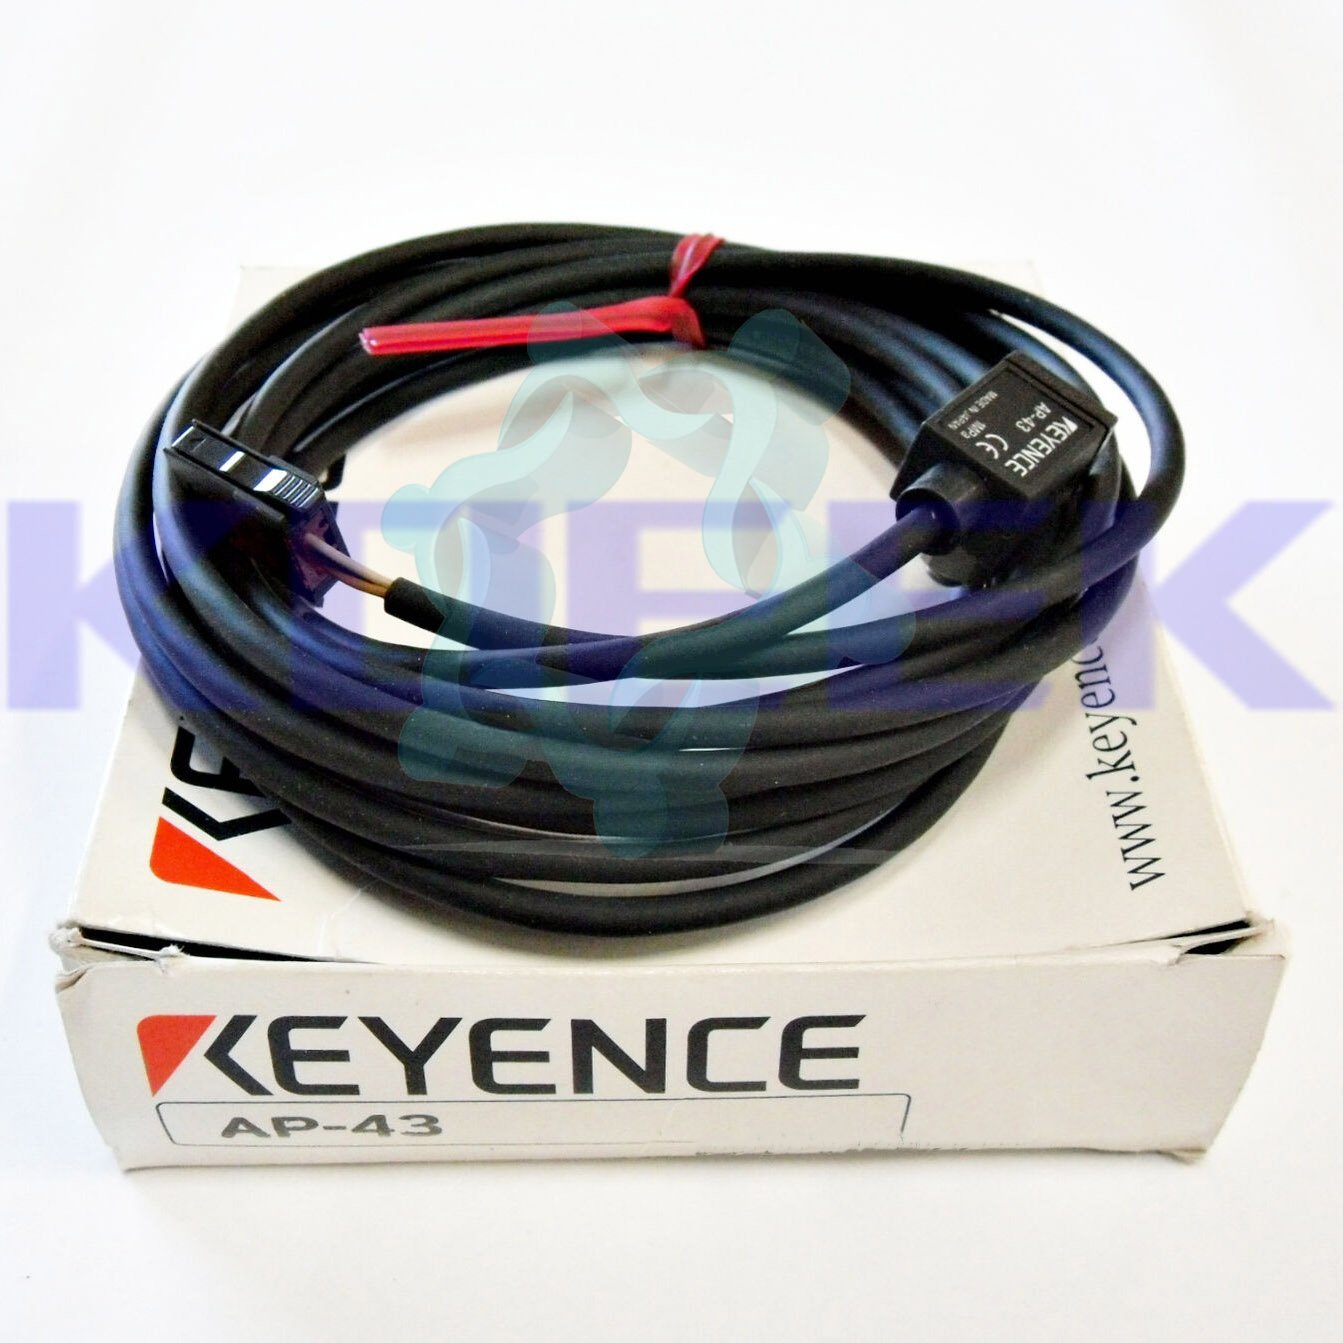 AP-43 KOEED 1, 80%, import_2020_10_10_031751, Keyence, Other, validate-product-description